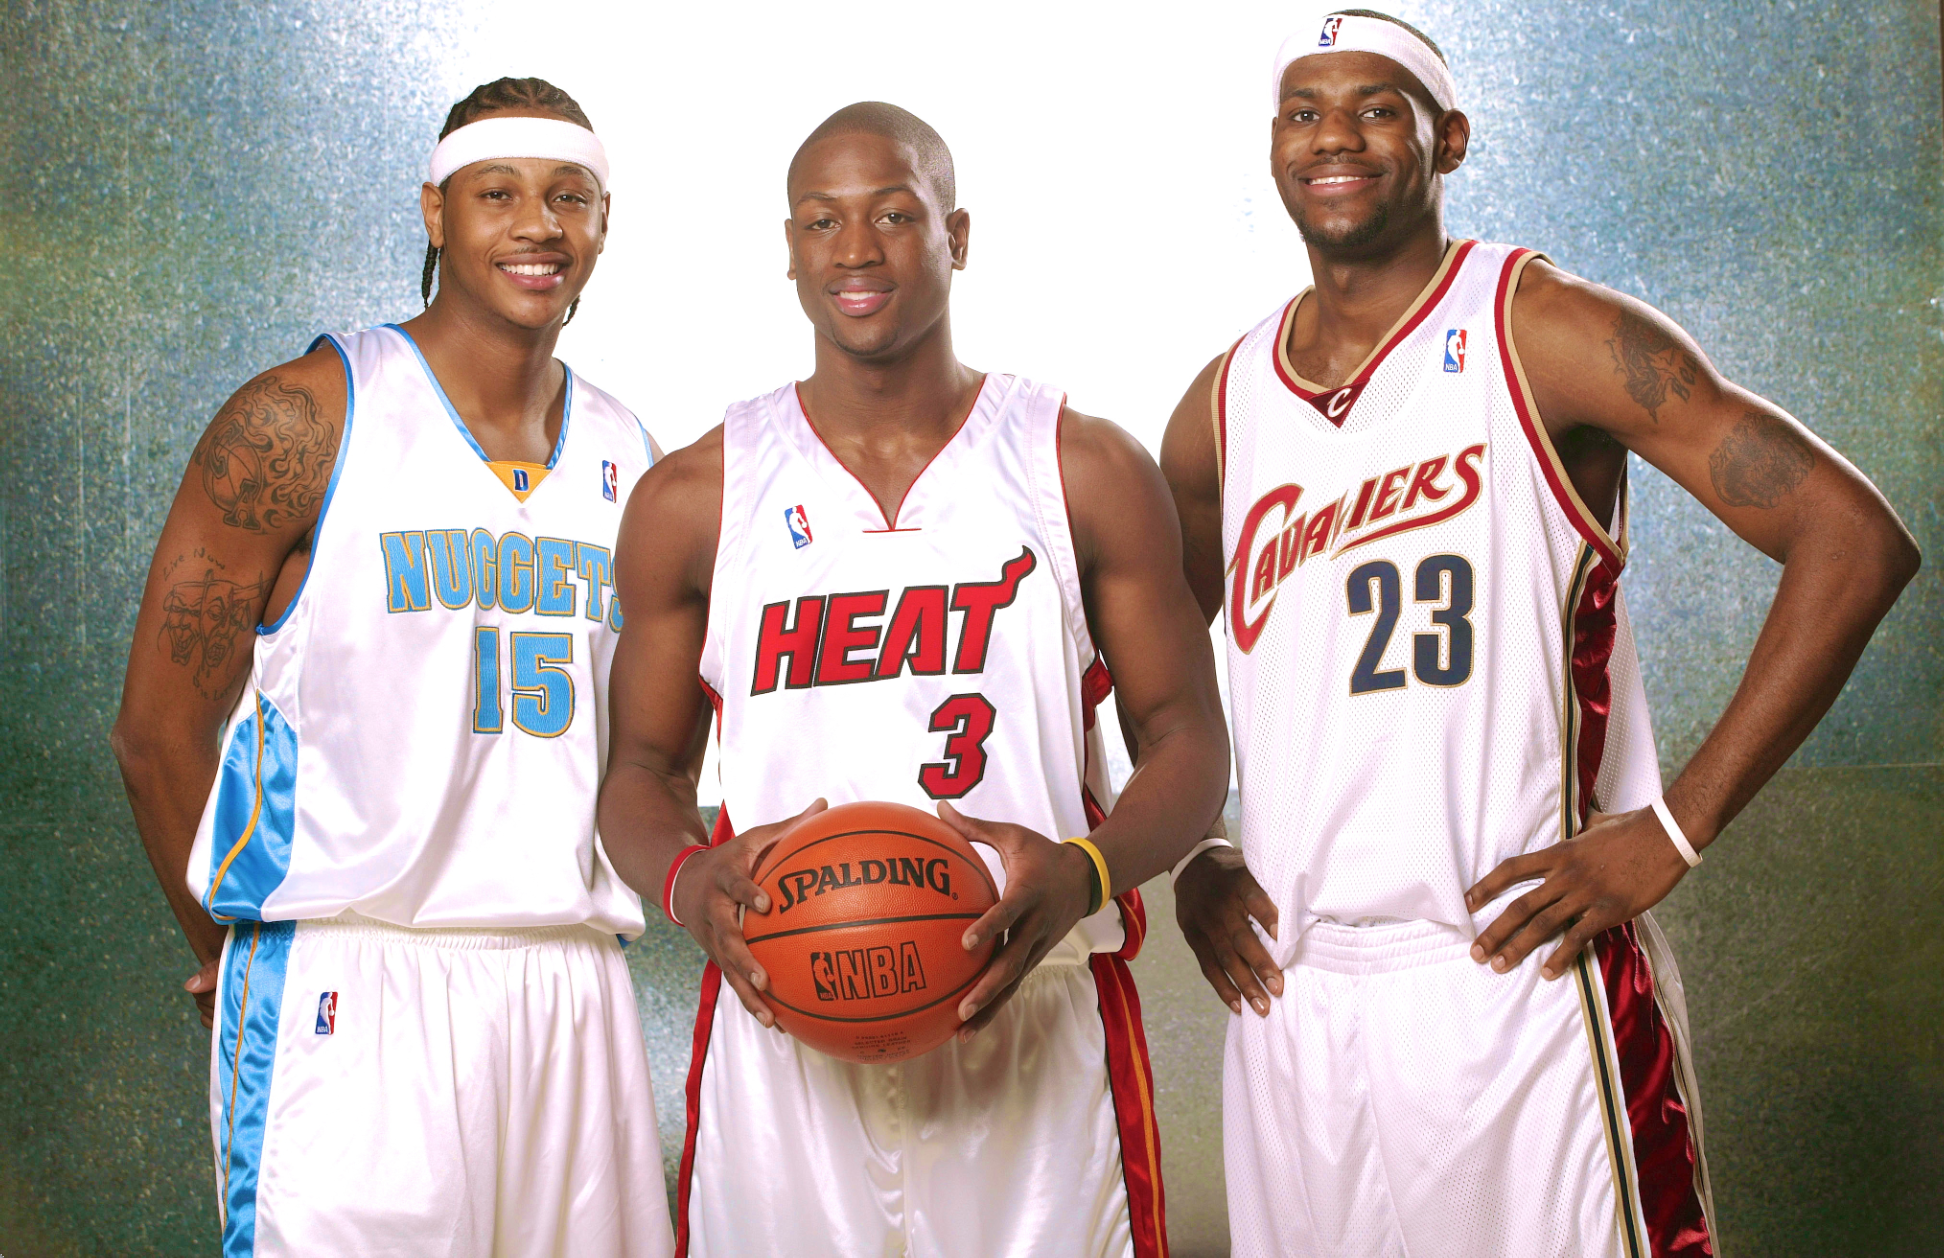 2003 NBA re-draft: The way it should have been